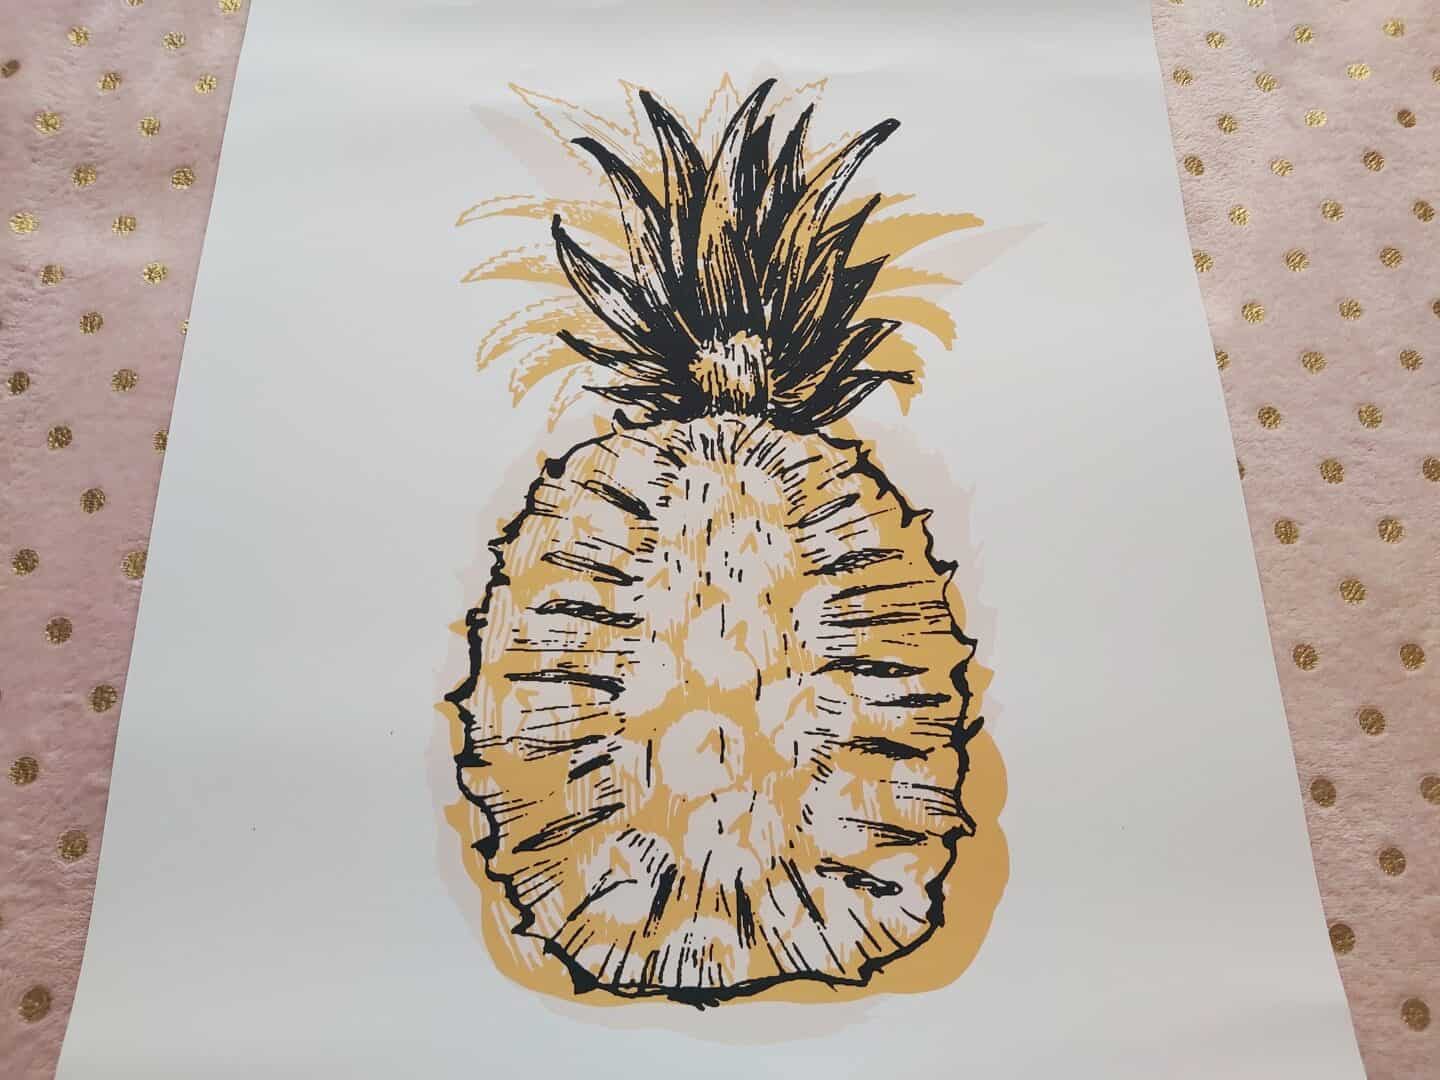 The lockdown valentine's gift of a cheerful pineapple print will brighten up your home